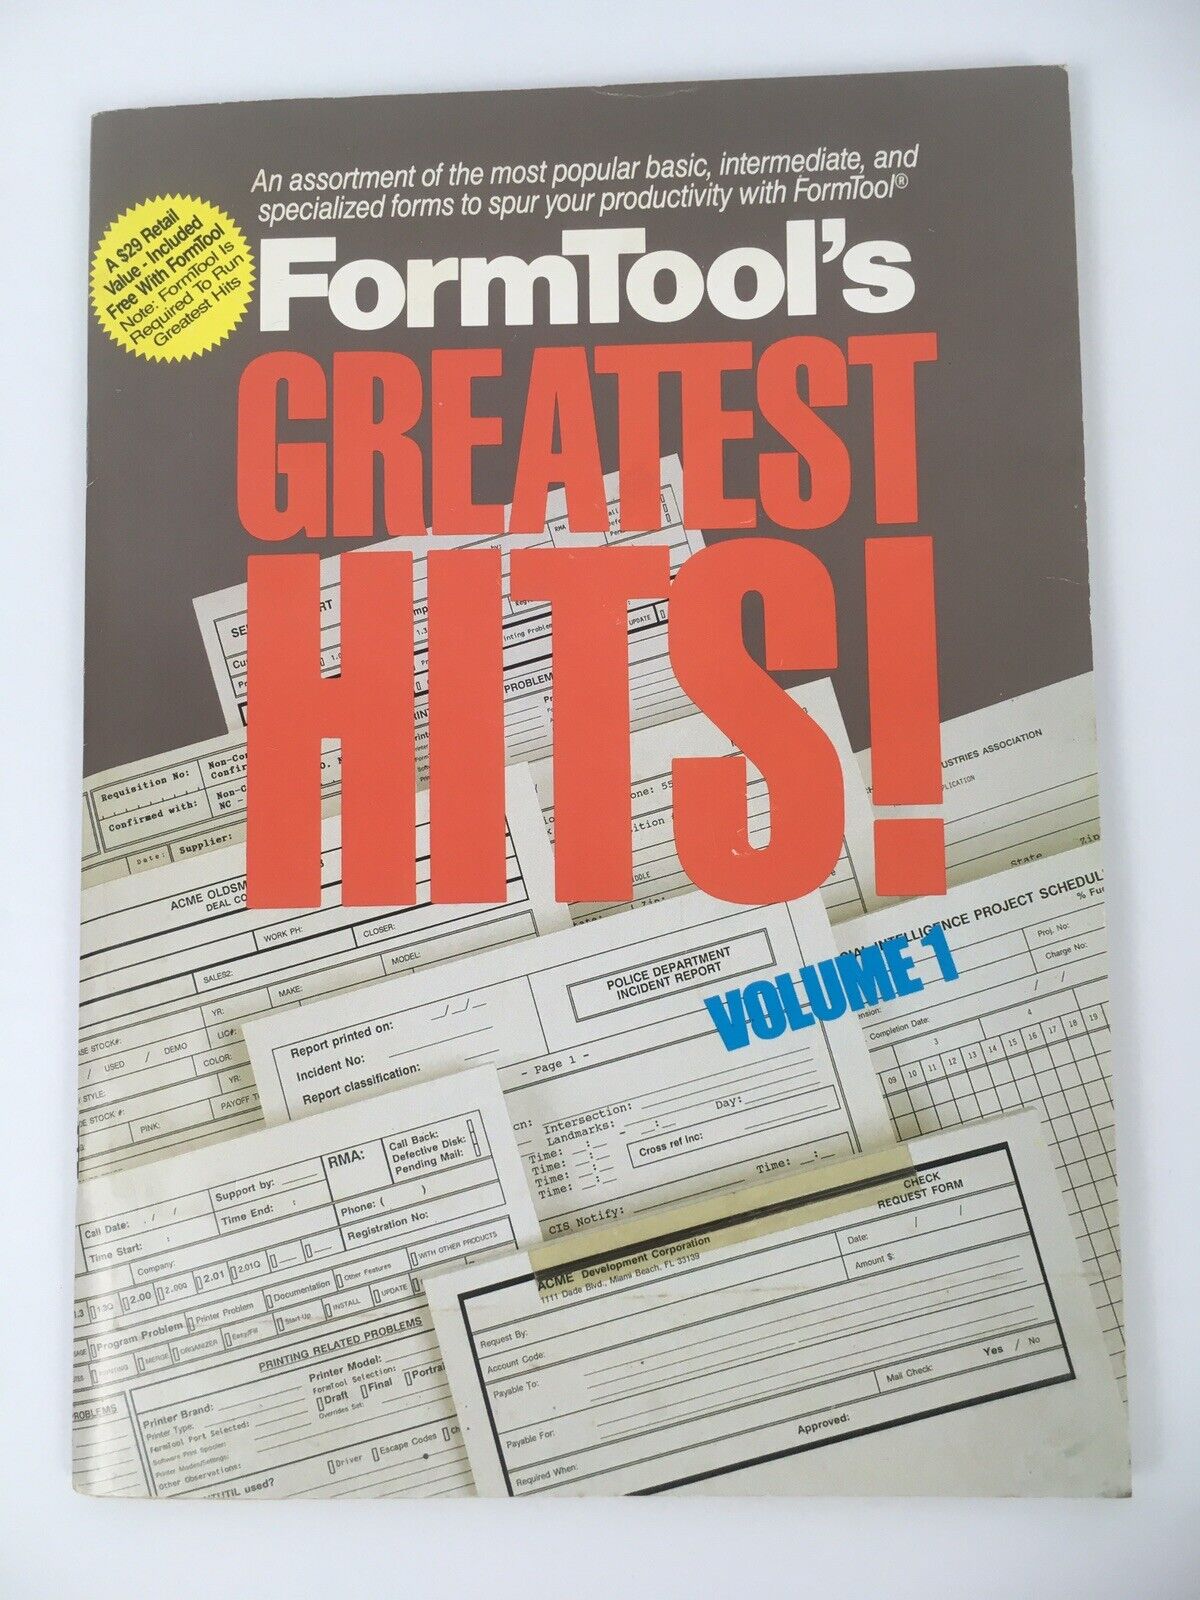 FormTool’s Greatest Hits Volume 1 Manual Booklet Miami Bch, FL ‘87–No Diskette